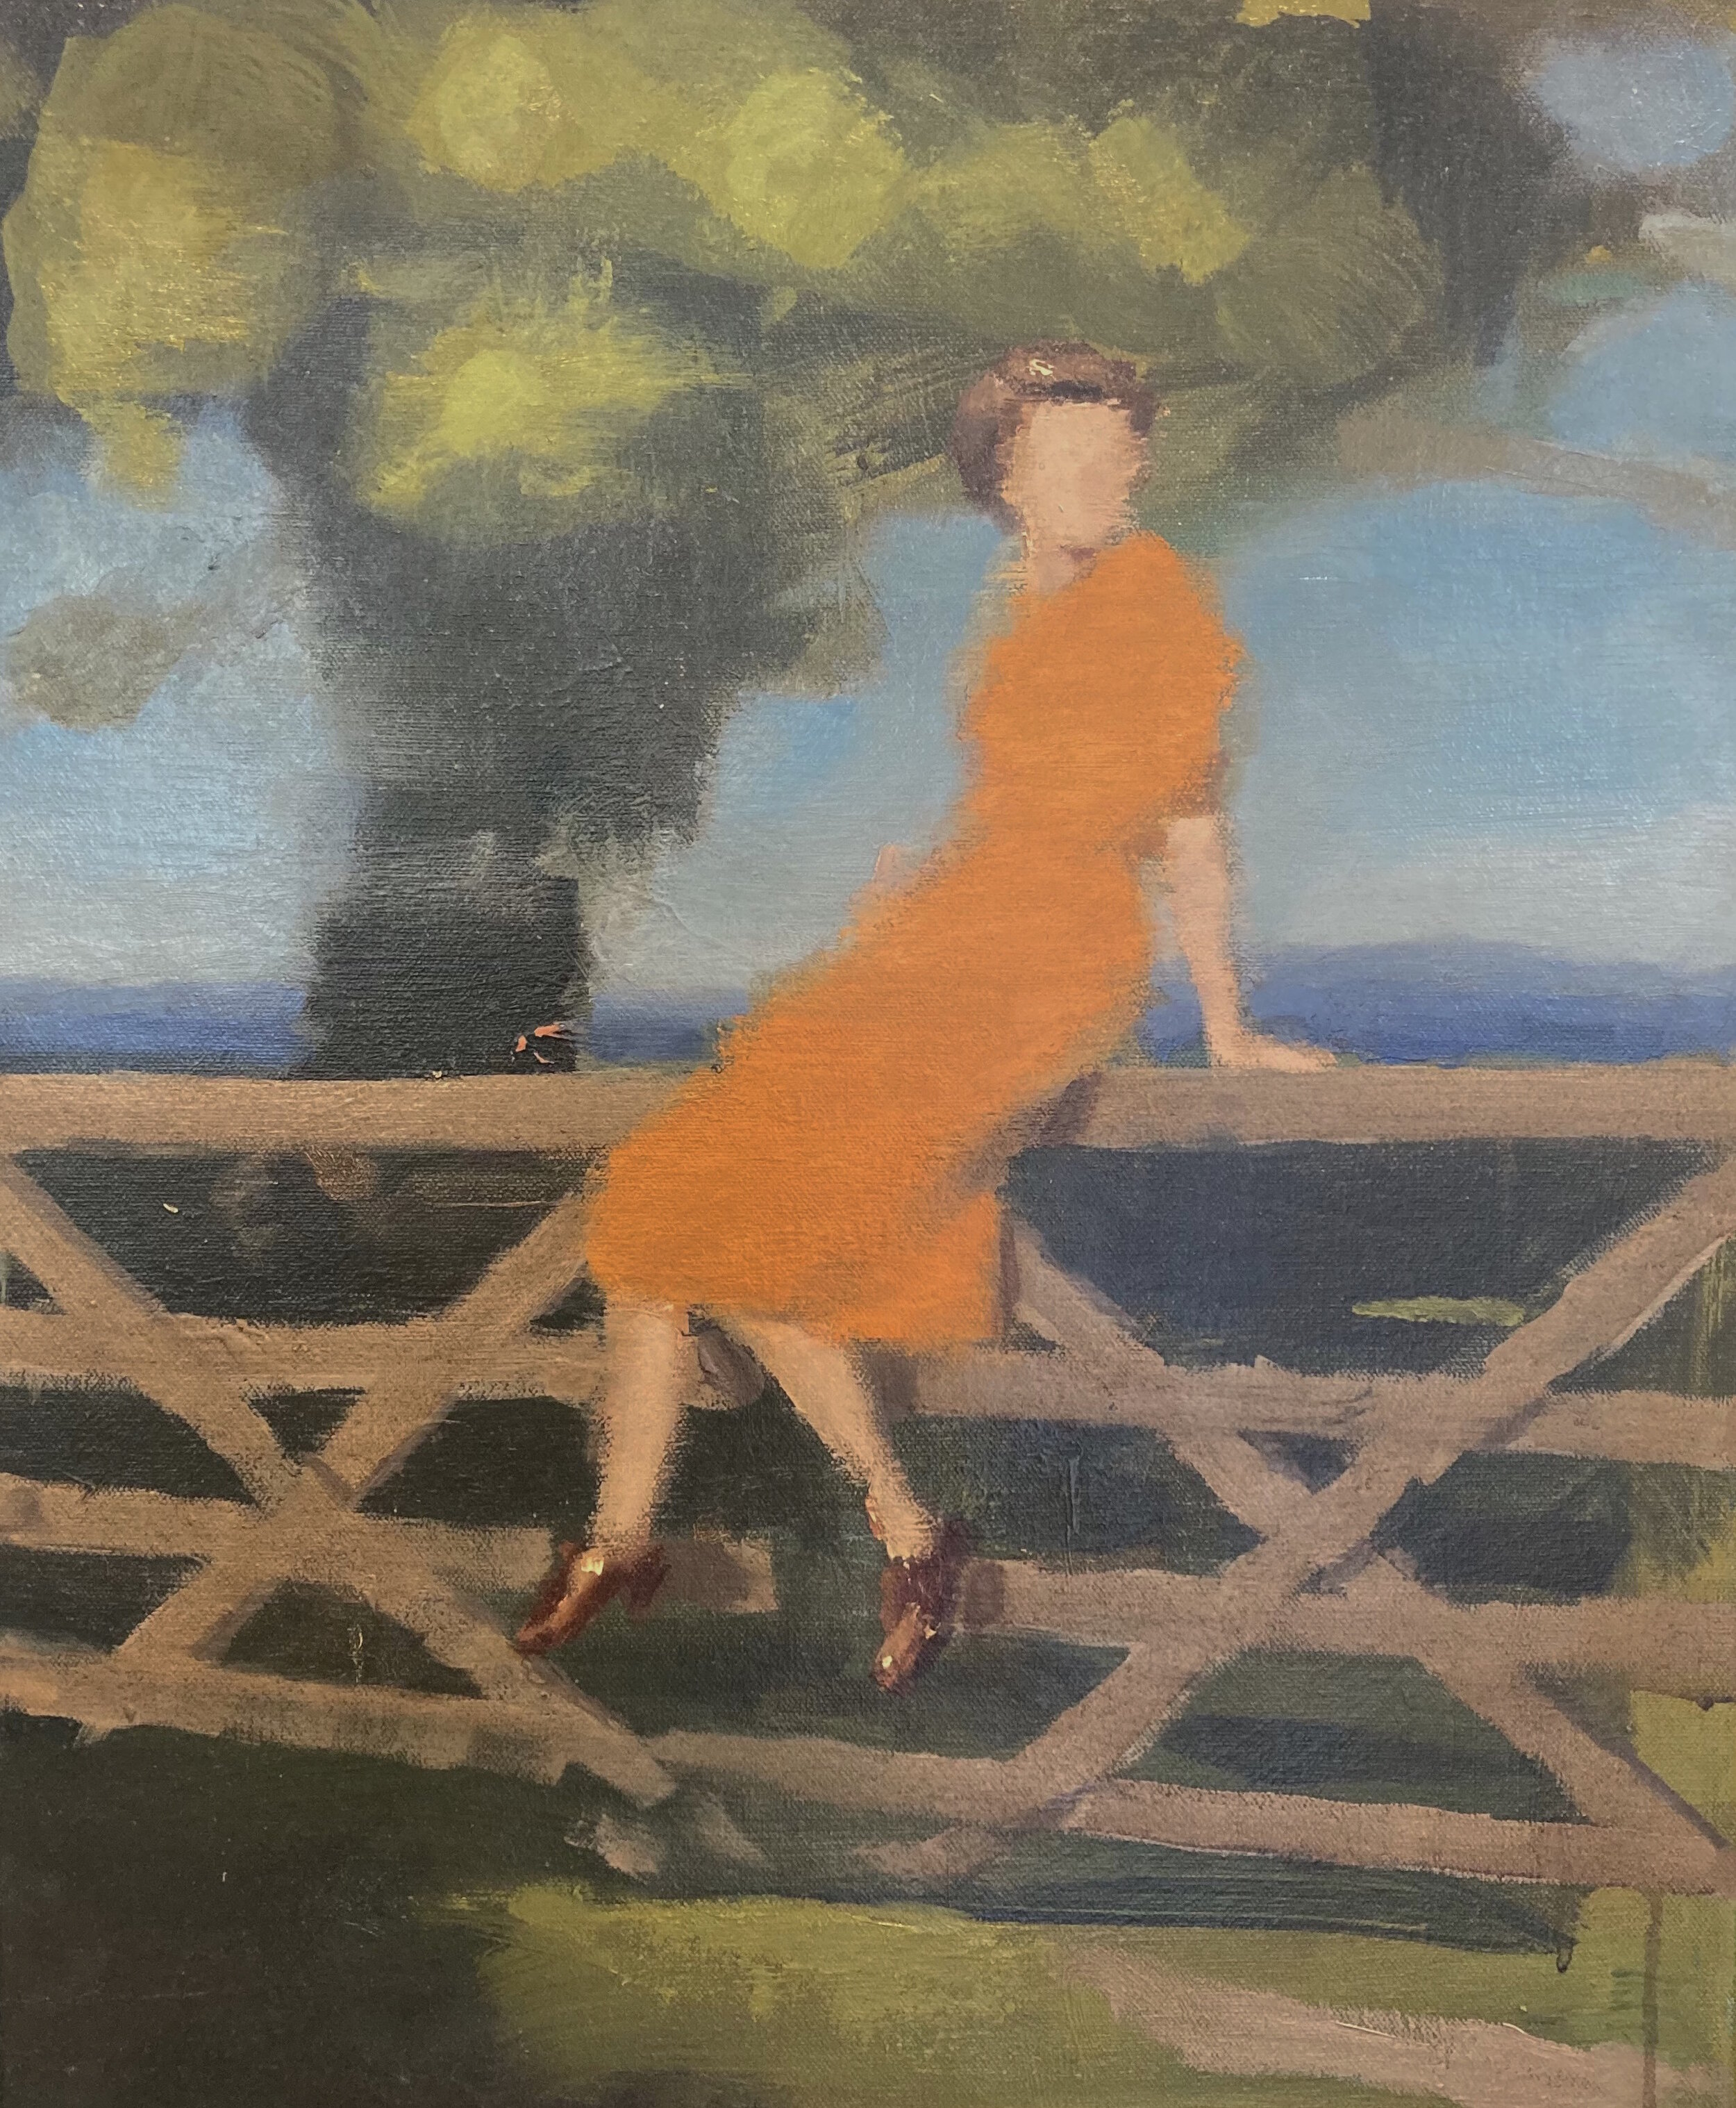  Title: Woman sitting on a gate Size:  51 x 41cm Medium: Oil and mixed media on canvas Price: £2500 